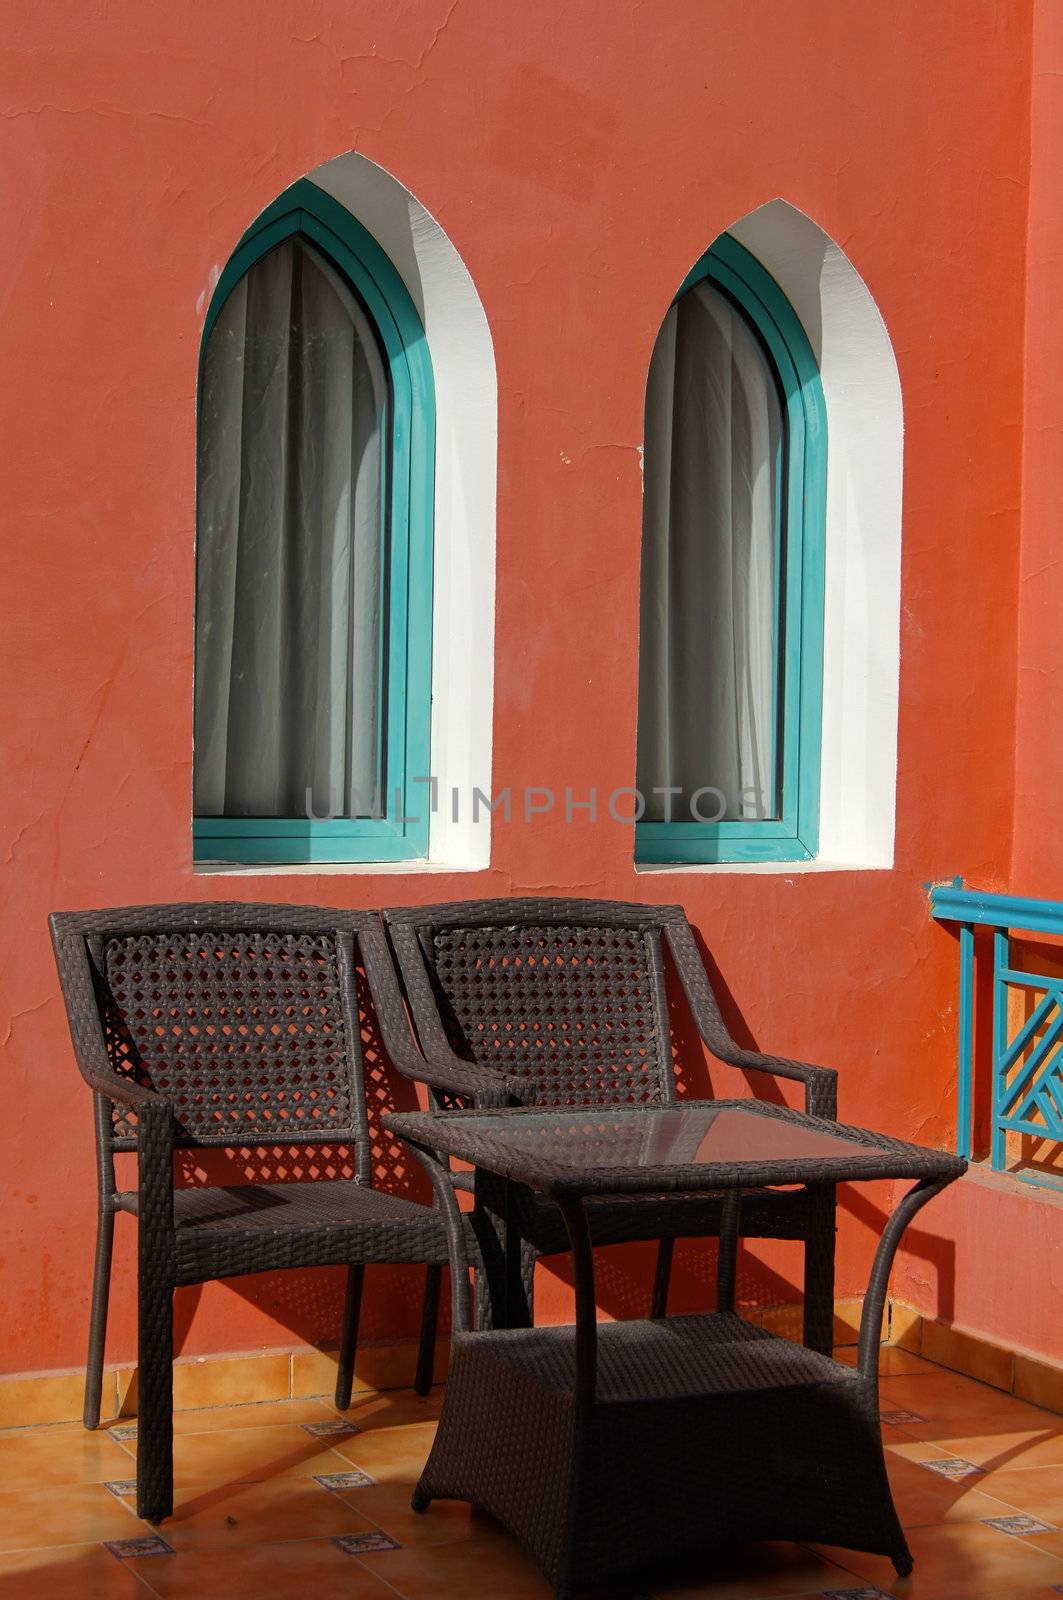 Arabic architecture: table and two chairs             